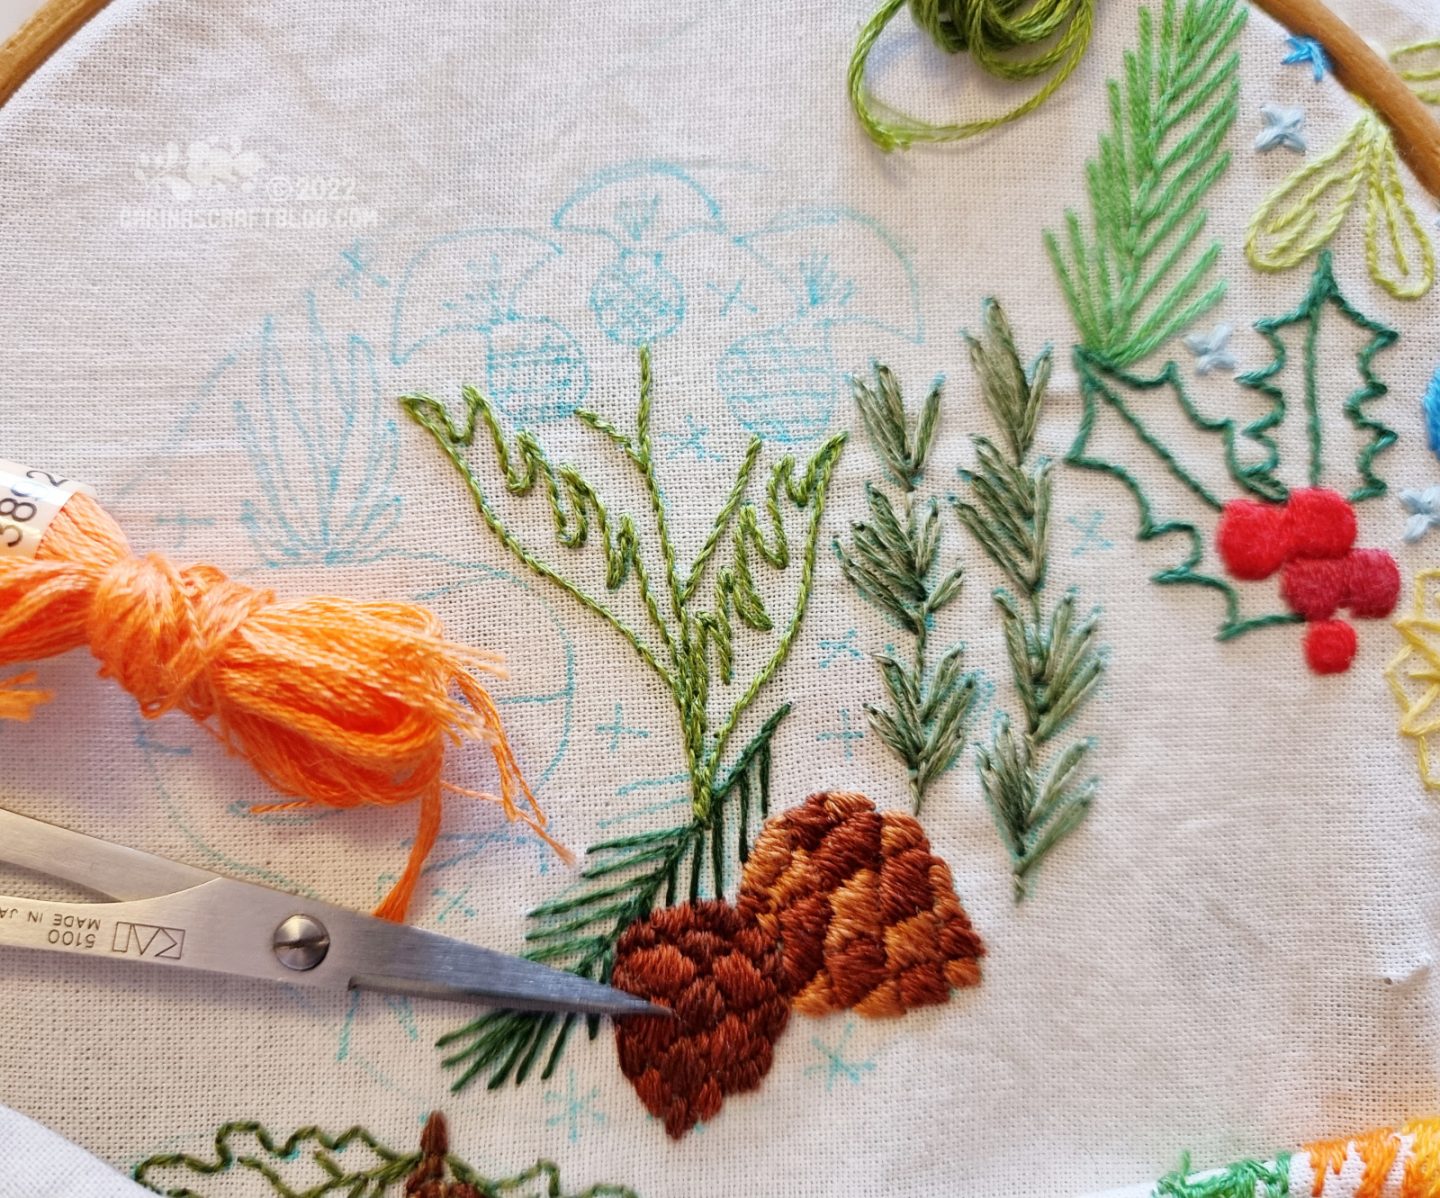 Closeup of embroidery on white fabric. Two pinecones are embroidered at the bottom, with rosemary next to them.